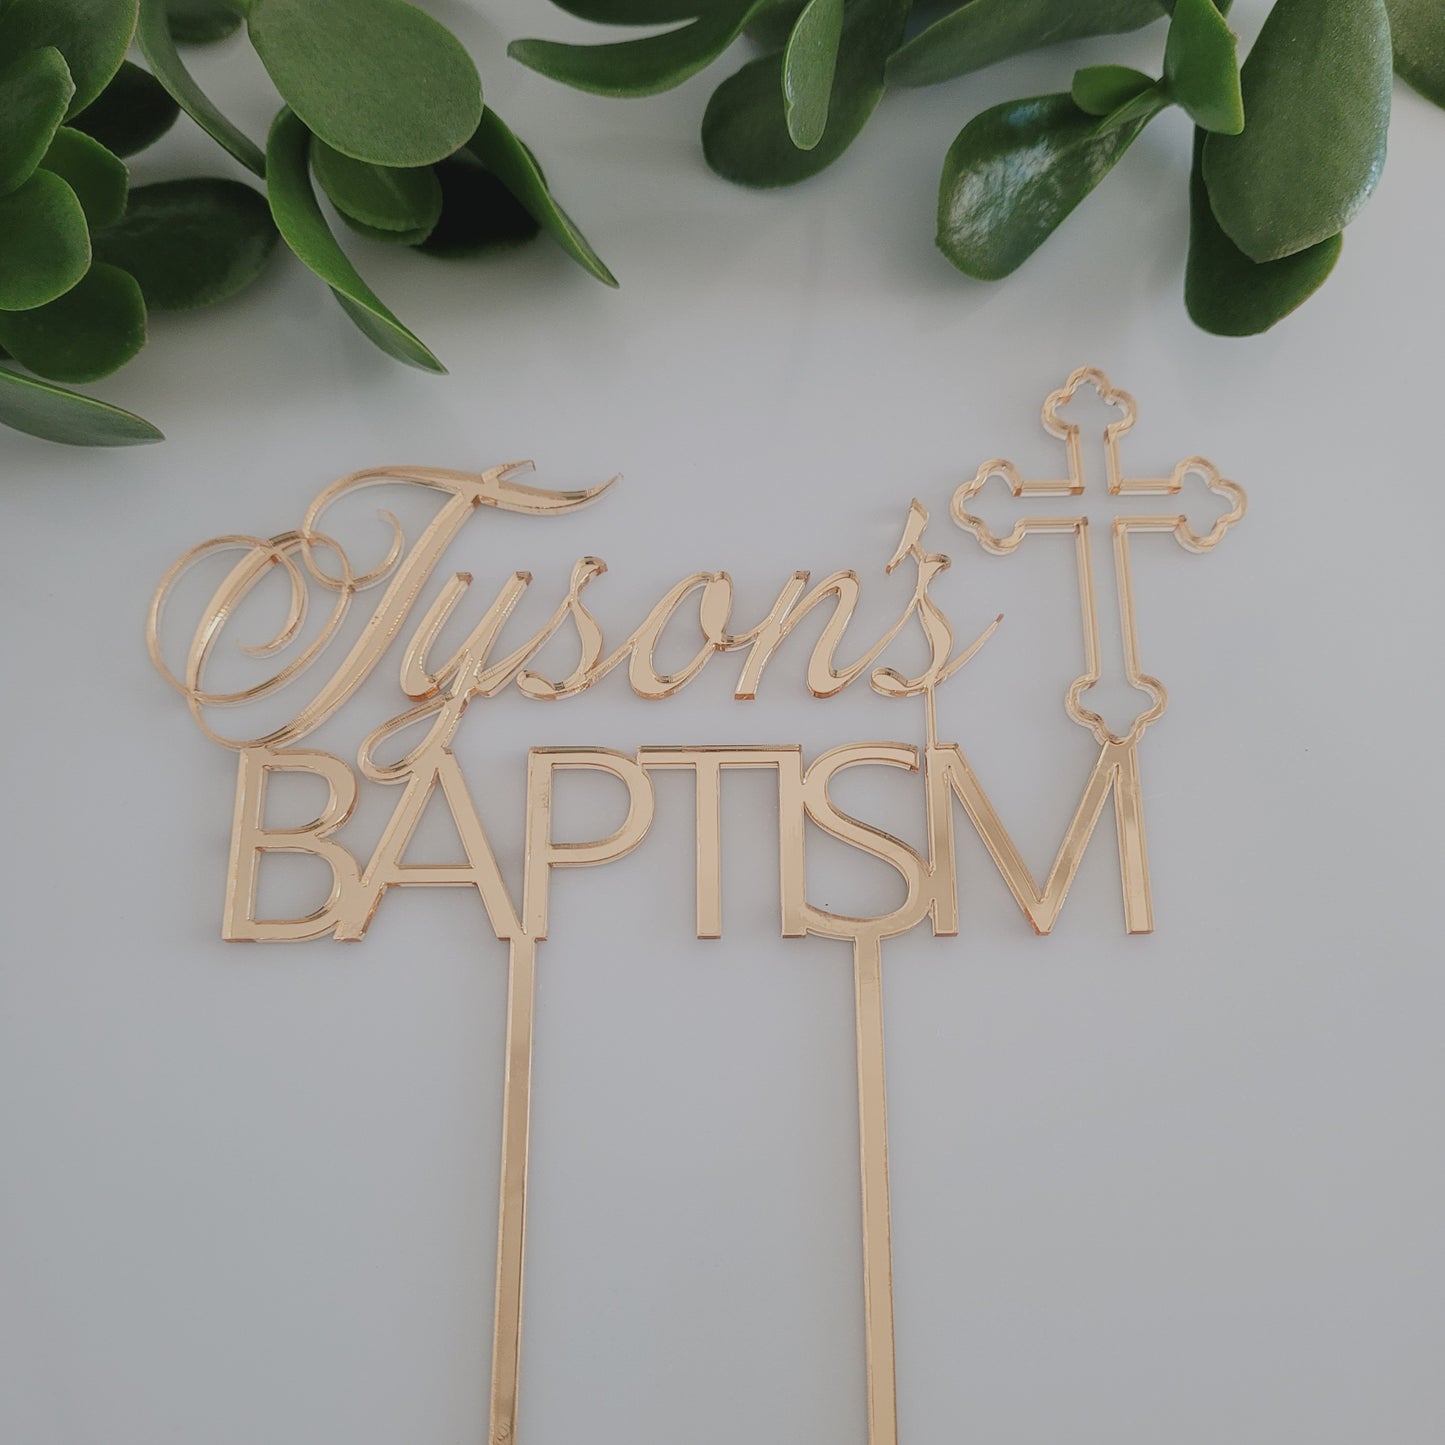 Baptism Cake Toppers